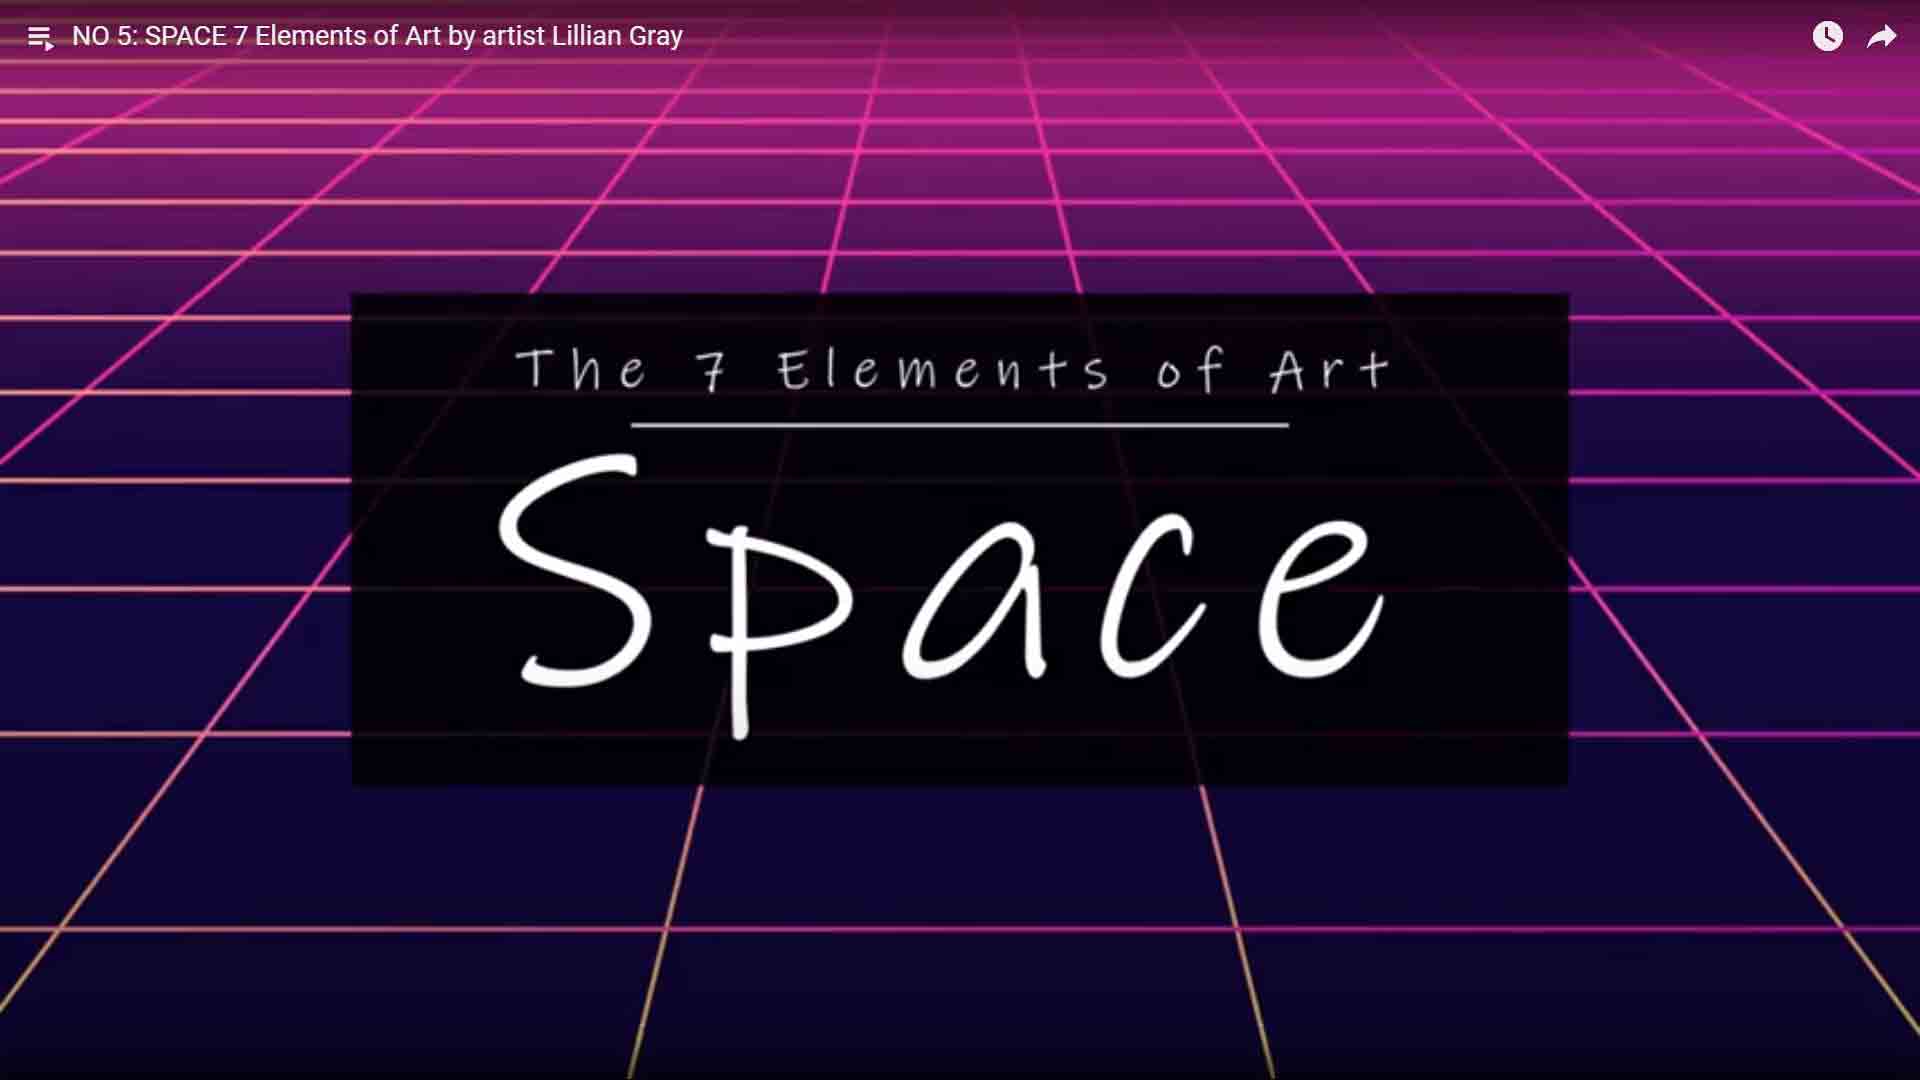 Space: 7 Elements of Art by artist Lillian Gray